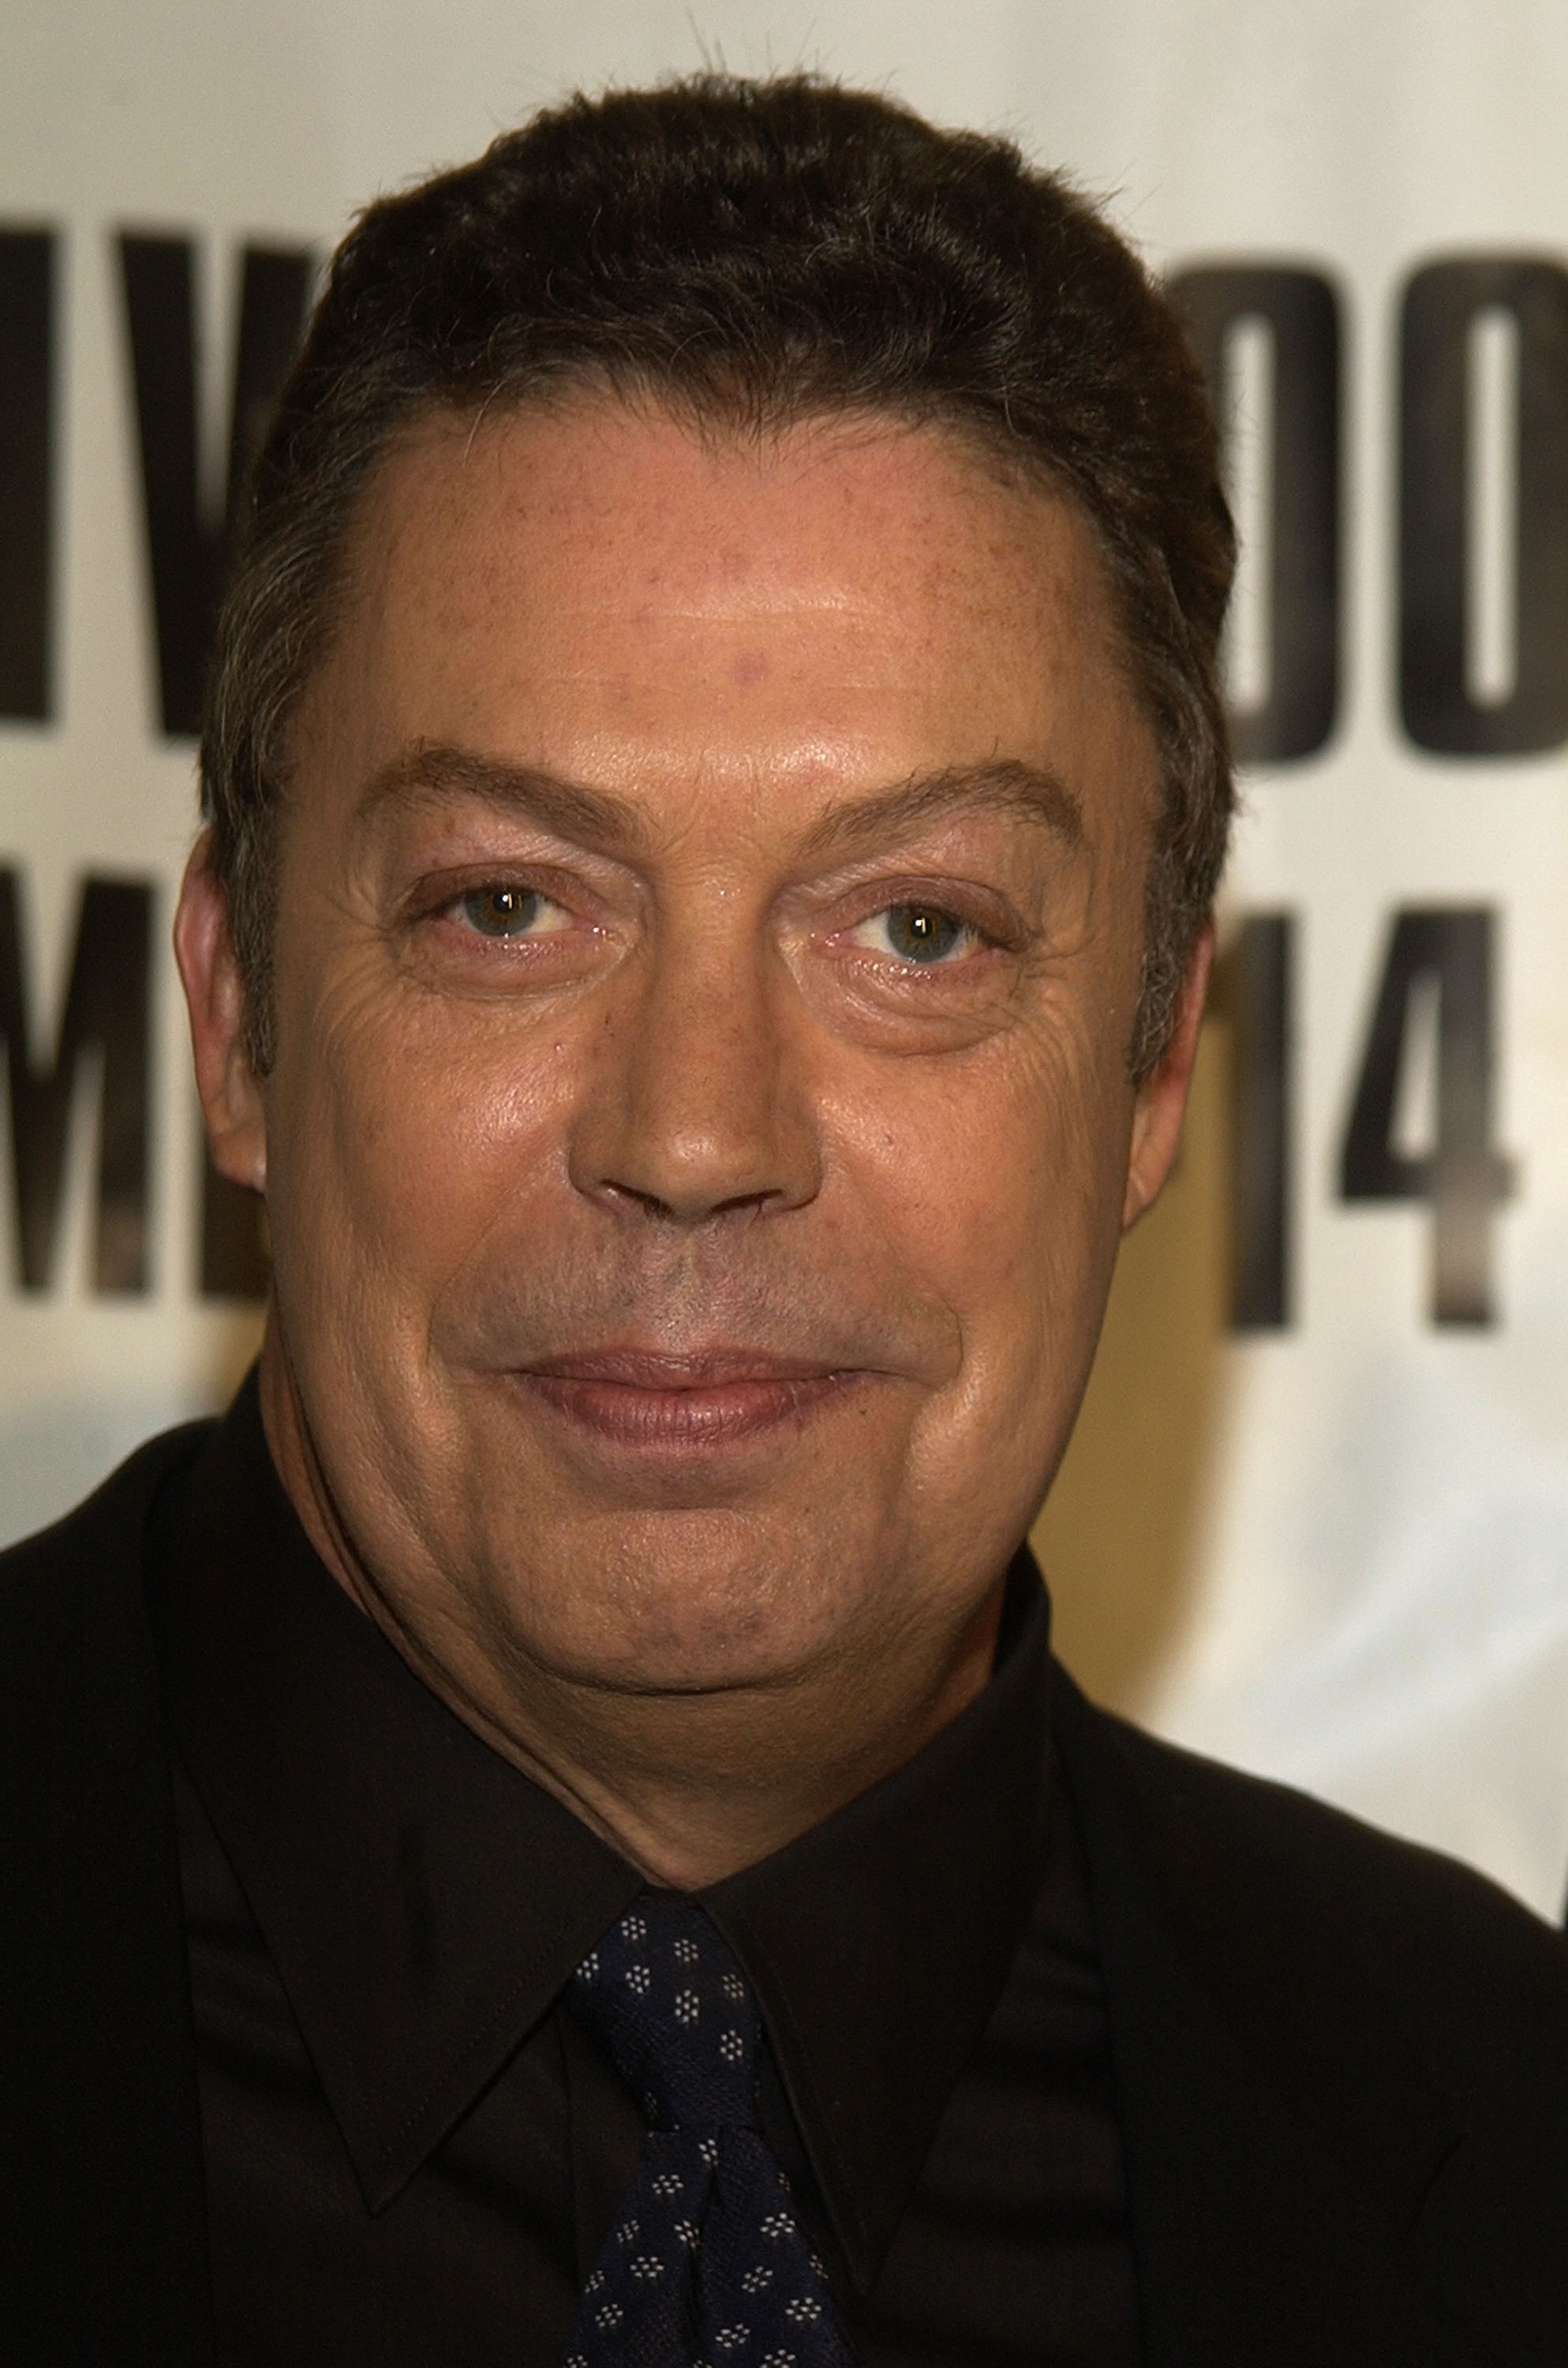 Tim Curry apepars at the 2002 Toronto Film Festival for a press conference regarding 'The Wild Thornberrys Movie'